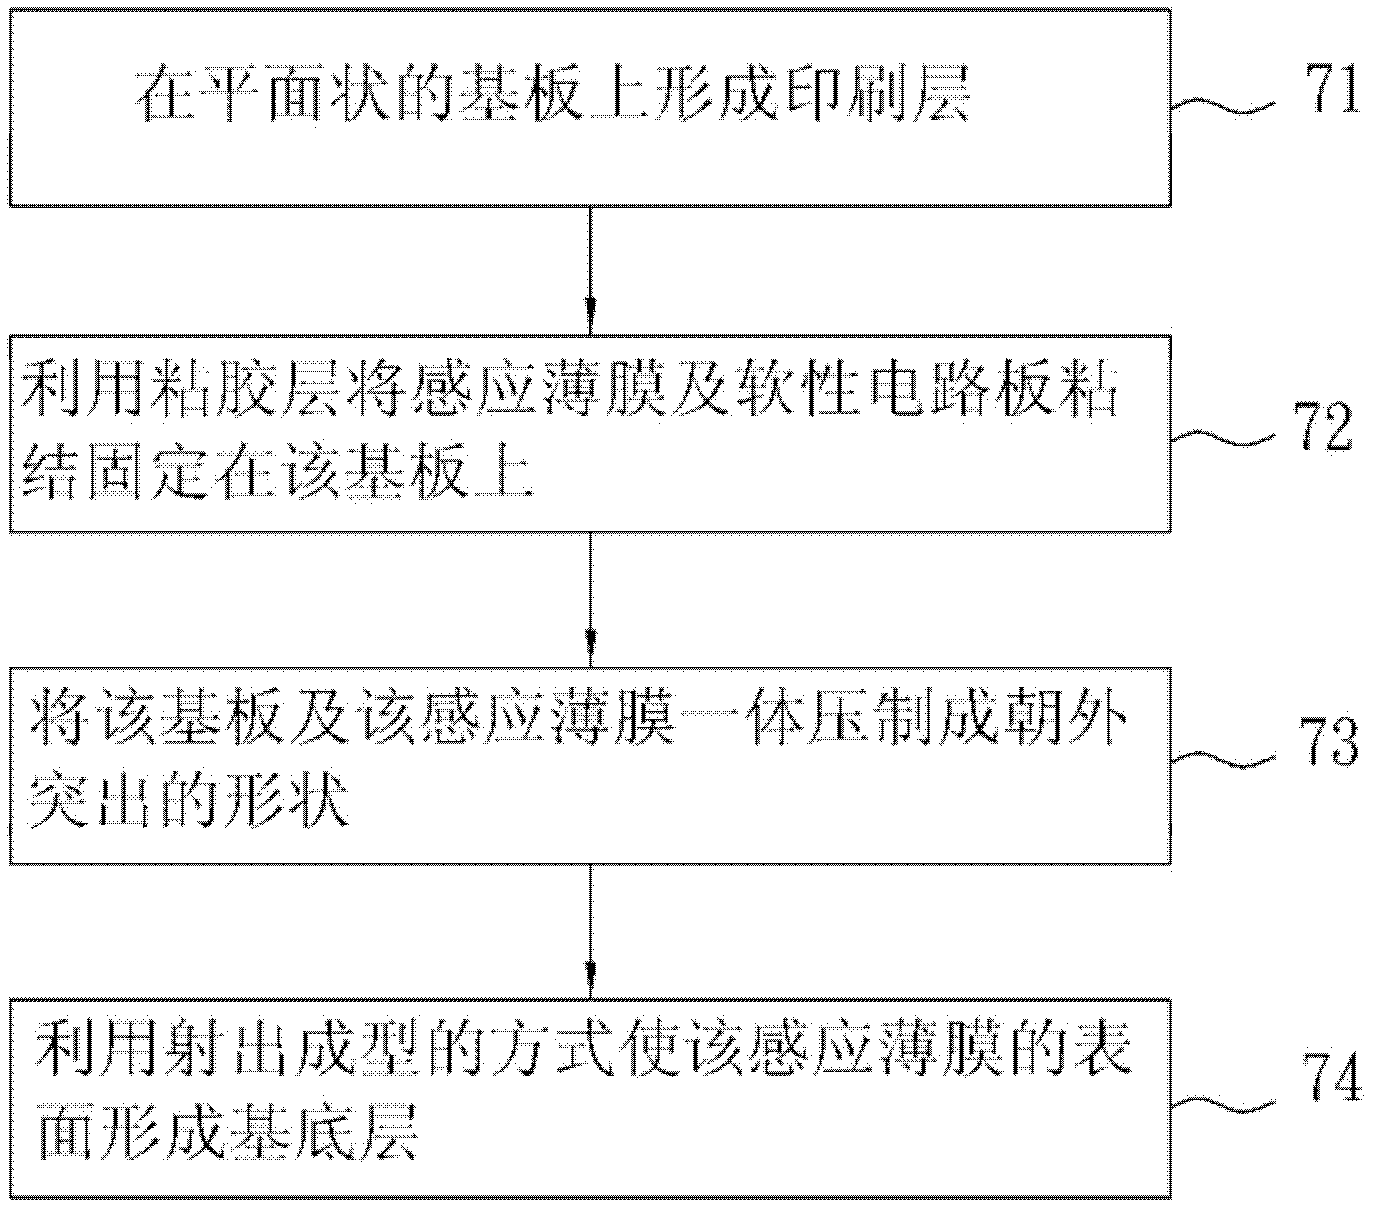 Stereoscopic touch control module and manufacturing method thereof